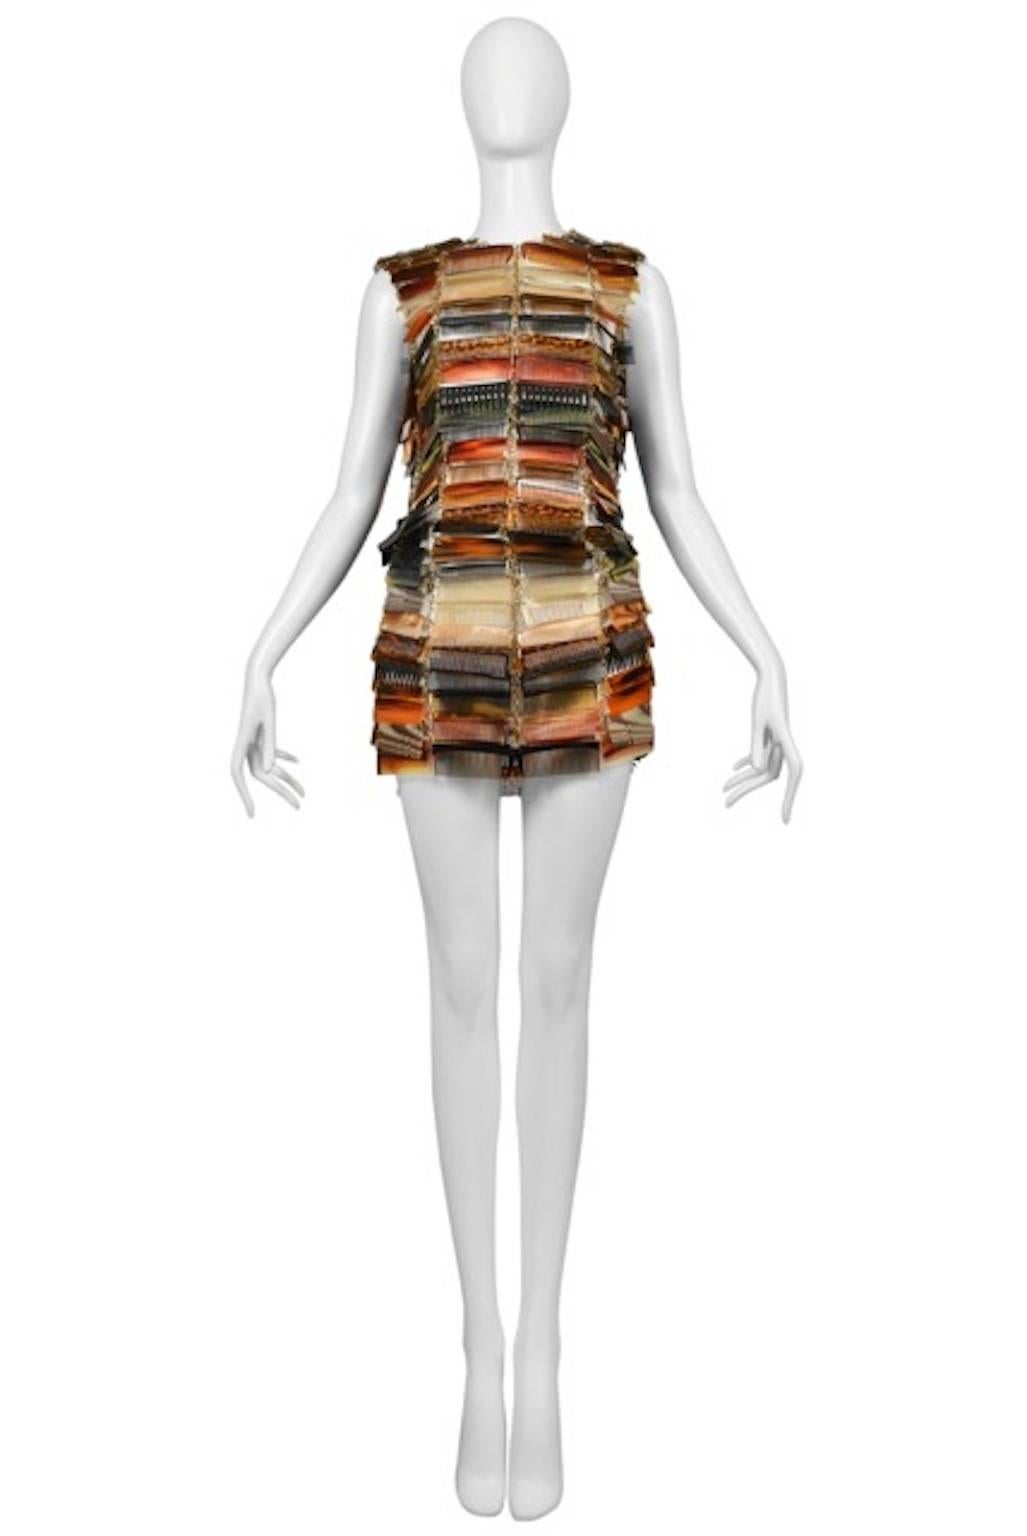 Vintage Maison Martin Margiela Couture Artisanal Comb Dress Ensemble. Hair-comb in plastic, tortoiseshell and horn are cut and assembled on a metal chain to make a top and skirt. 22 hours to produce. Runway piece from the Spring / Summer 2009